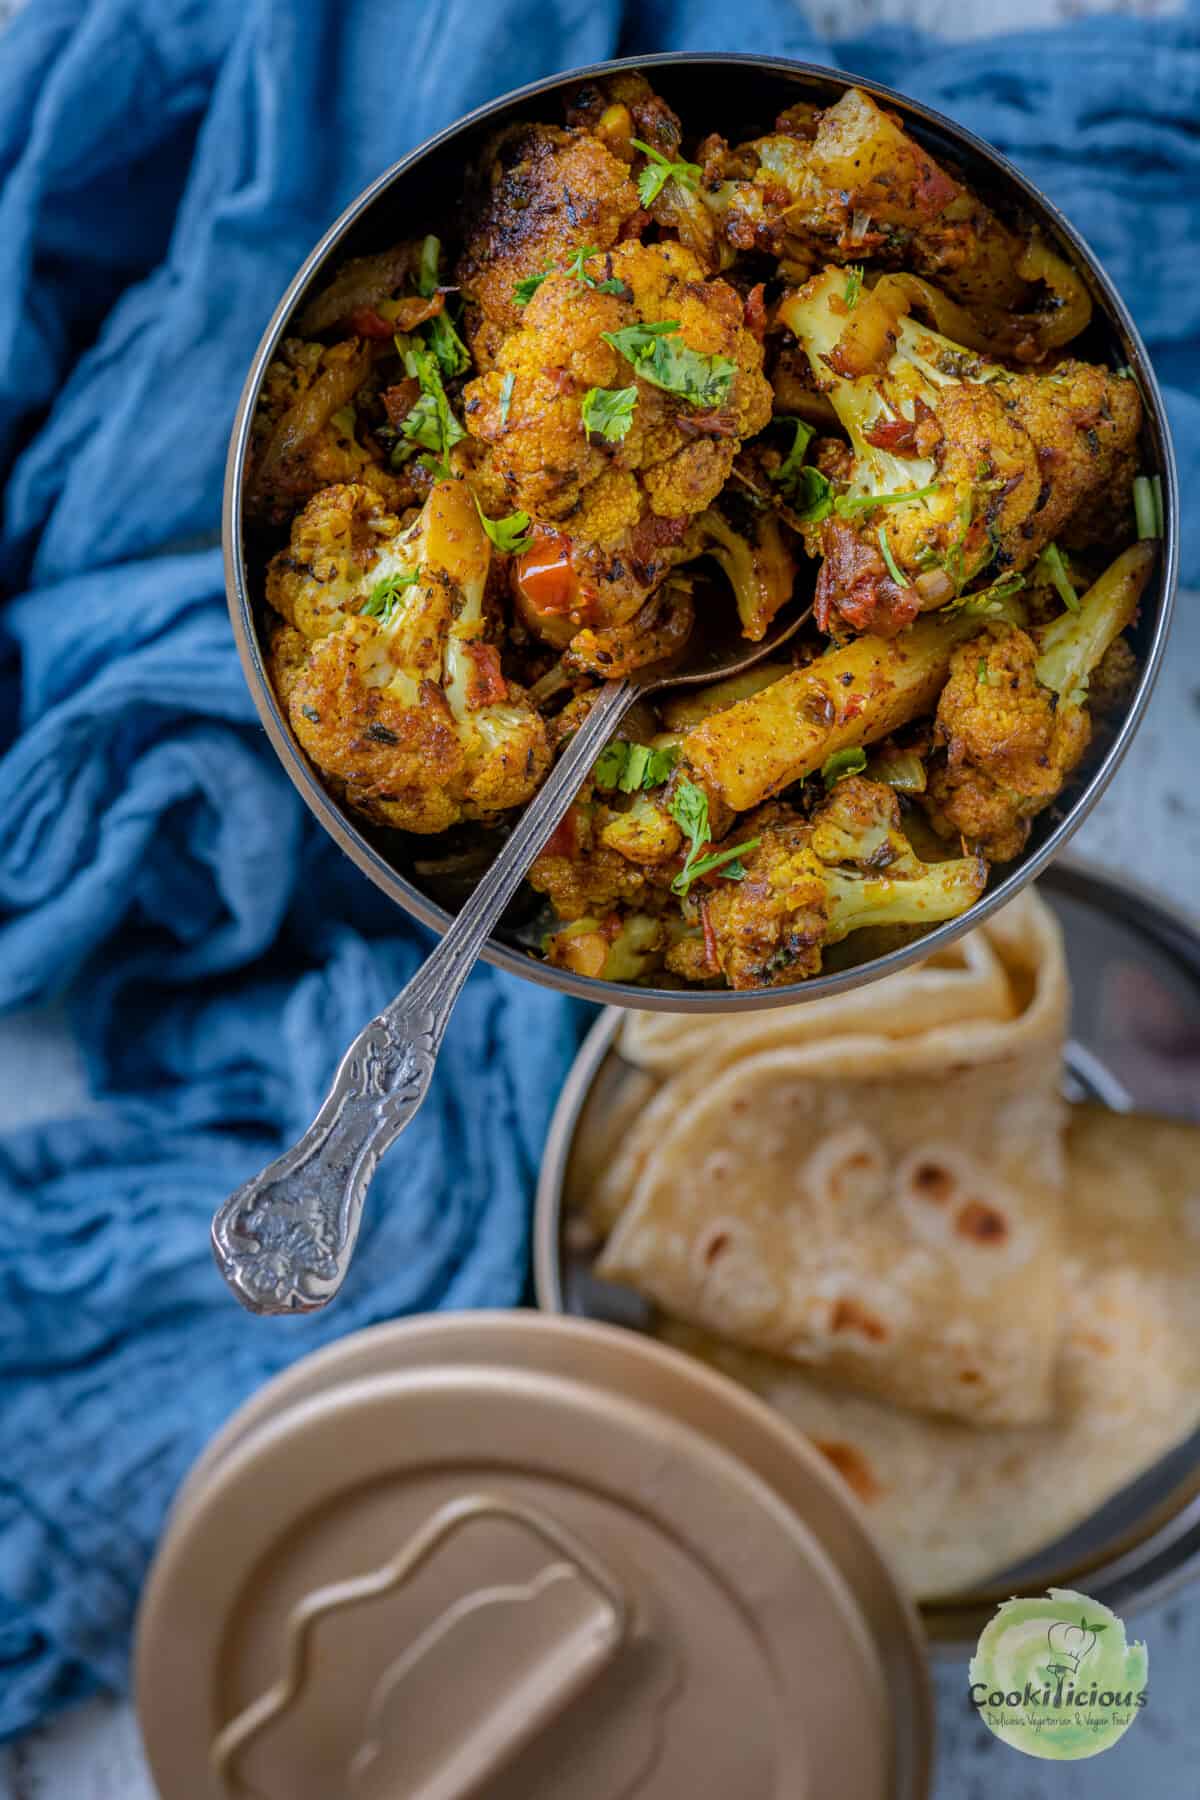 Aloo Gobi served in an Indian lunch box with chapati.